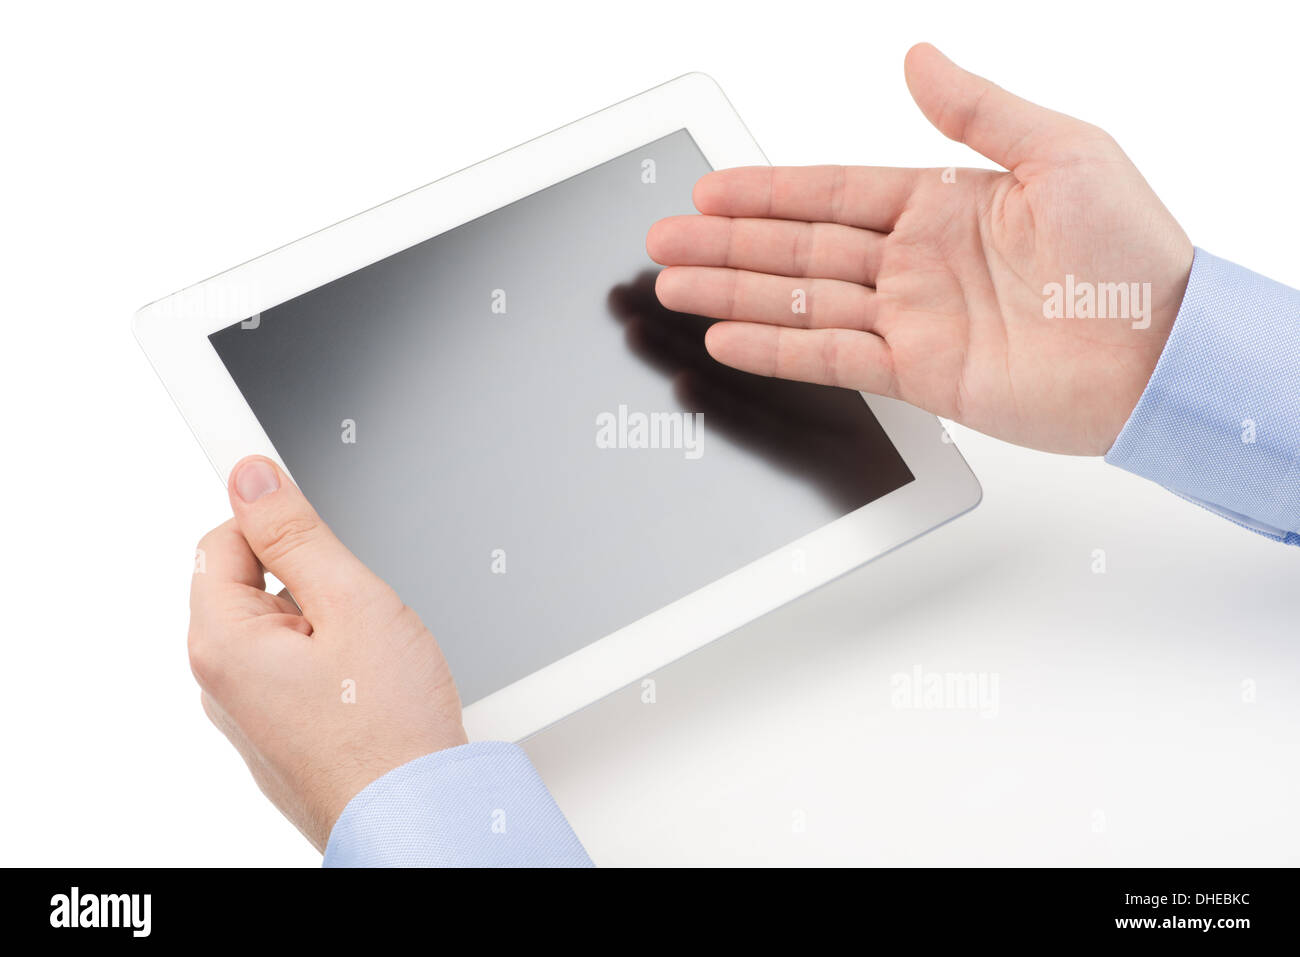 Man holding a tablet computer and directing with other hand toward the screenn on a white background. Stock Photo